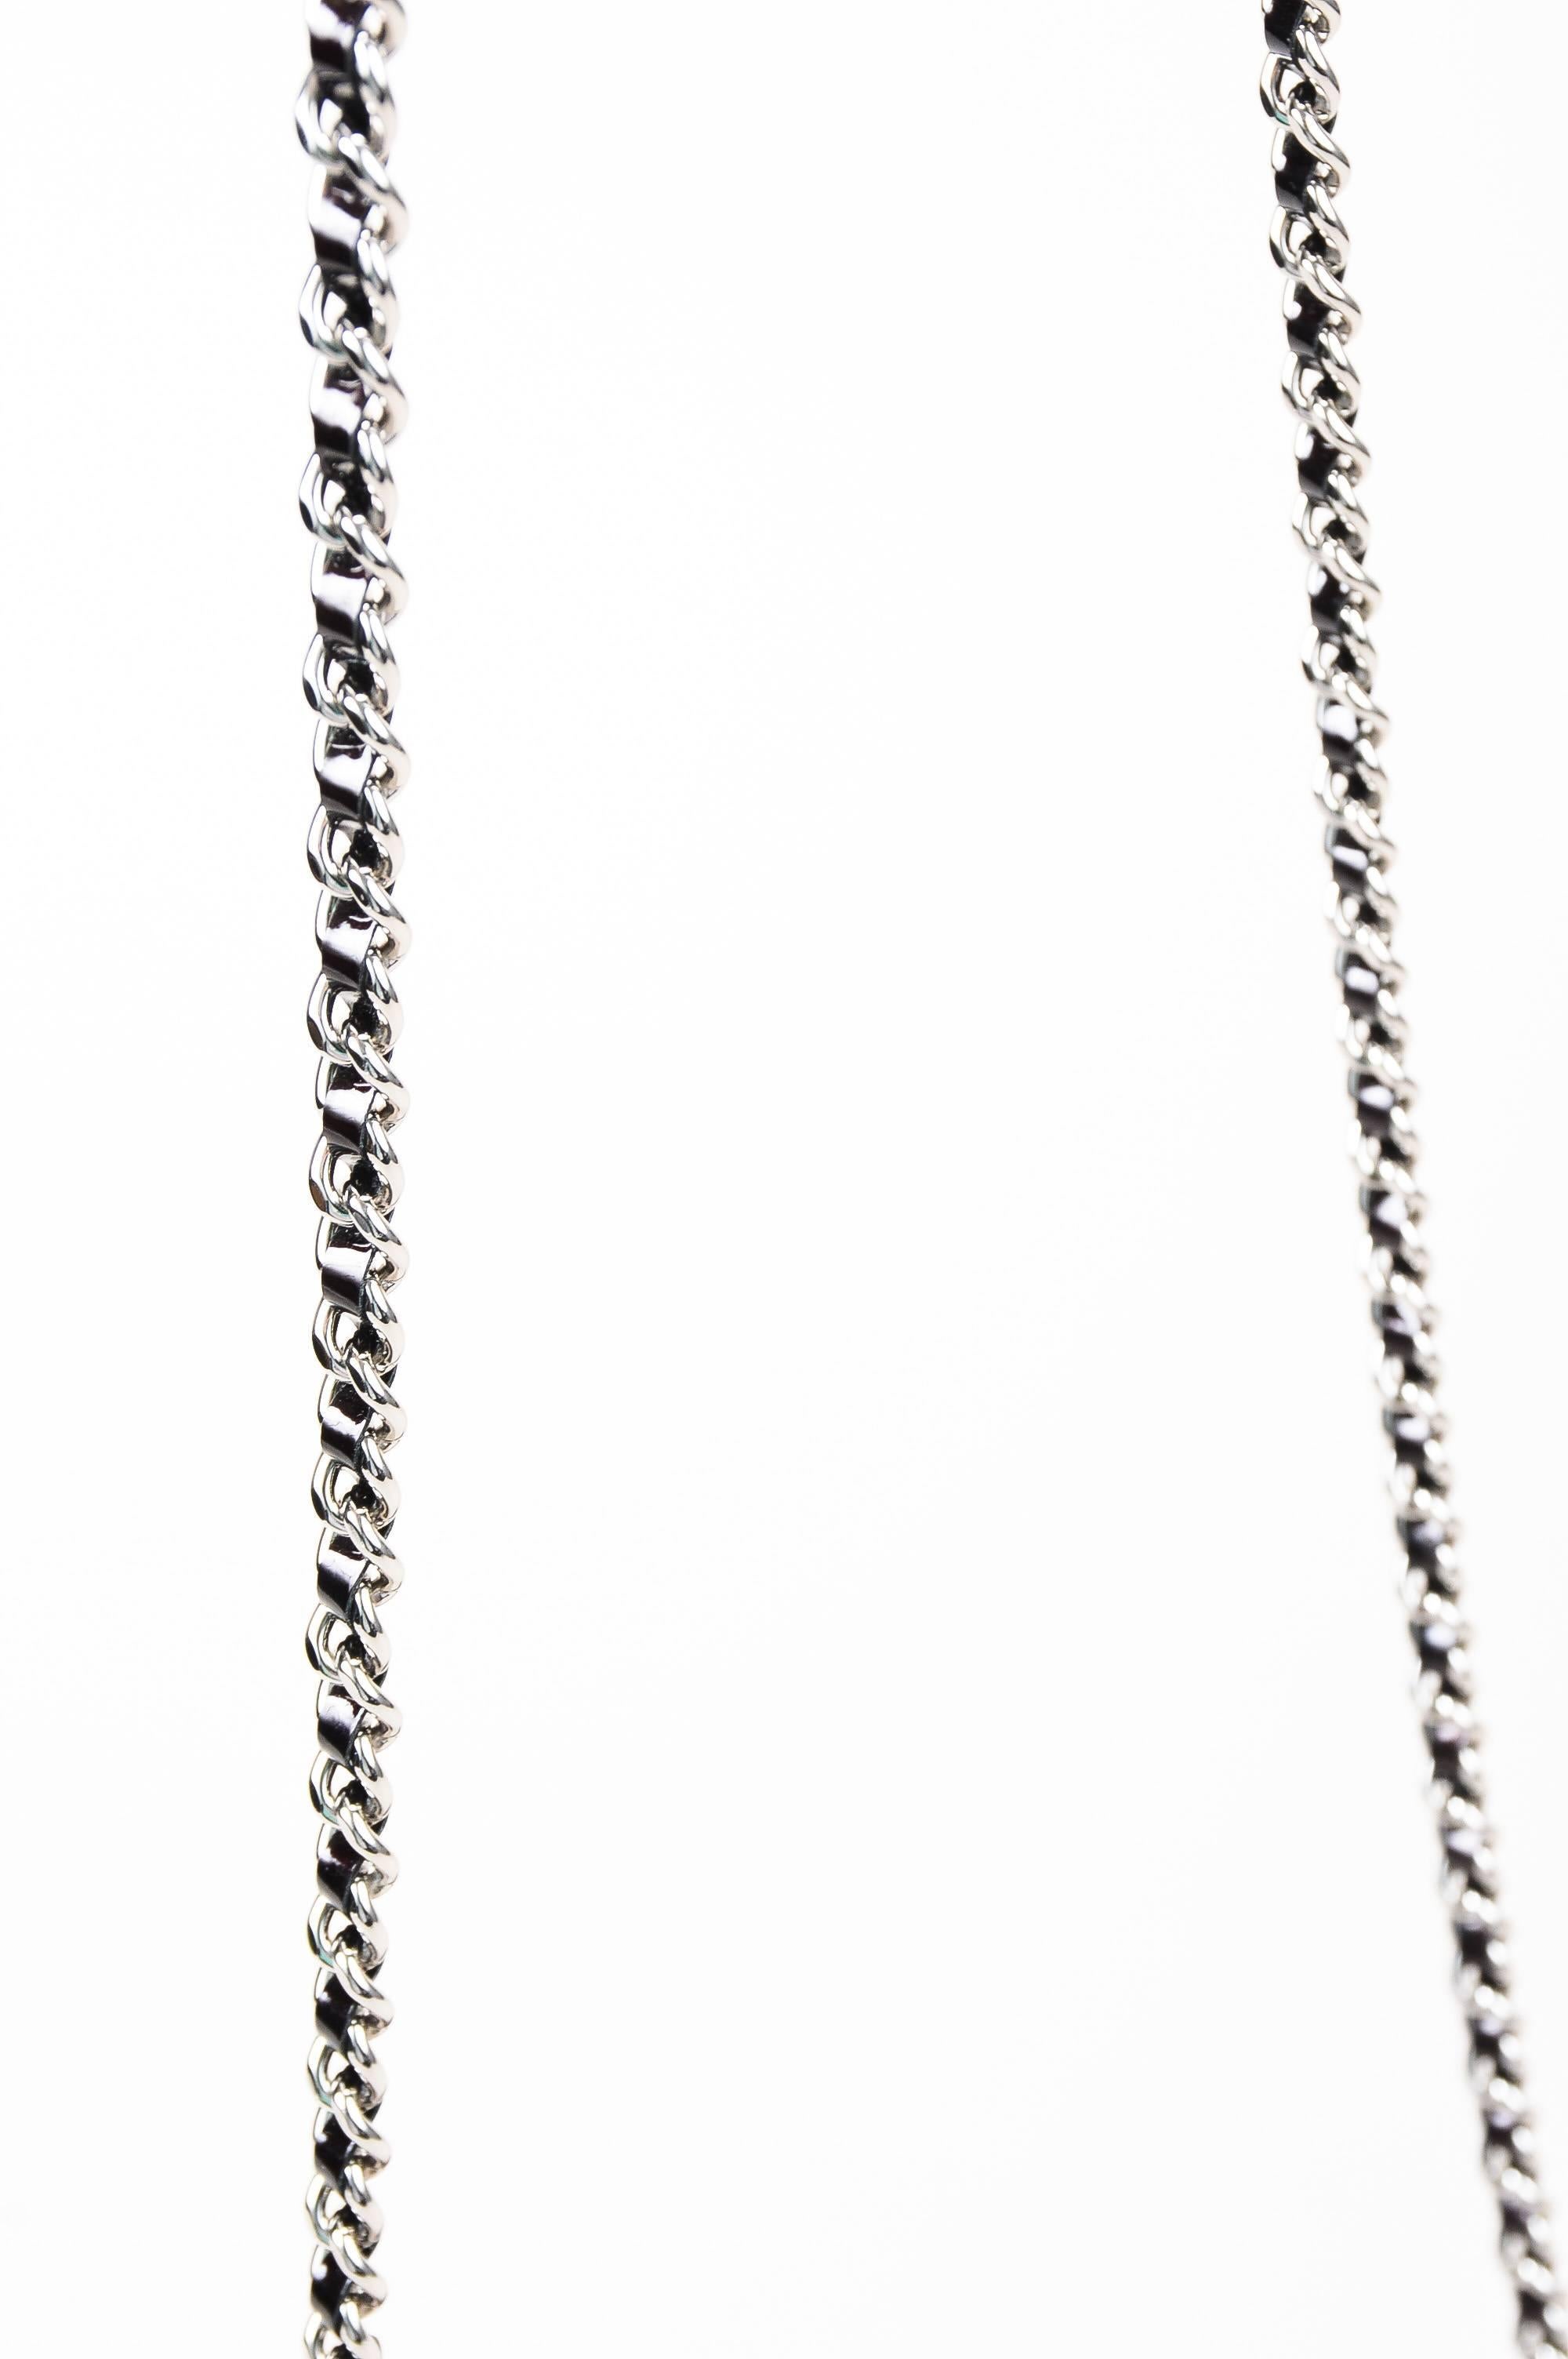 Women's Chanel Eggplant Patent Leather Silver Tone Metal Chain 